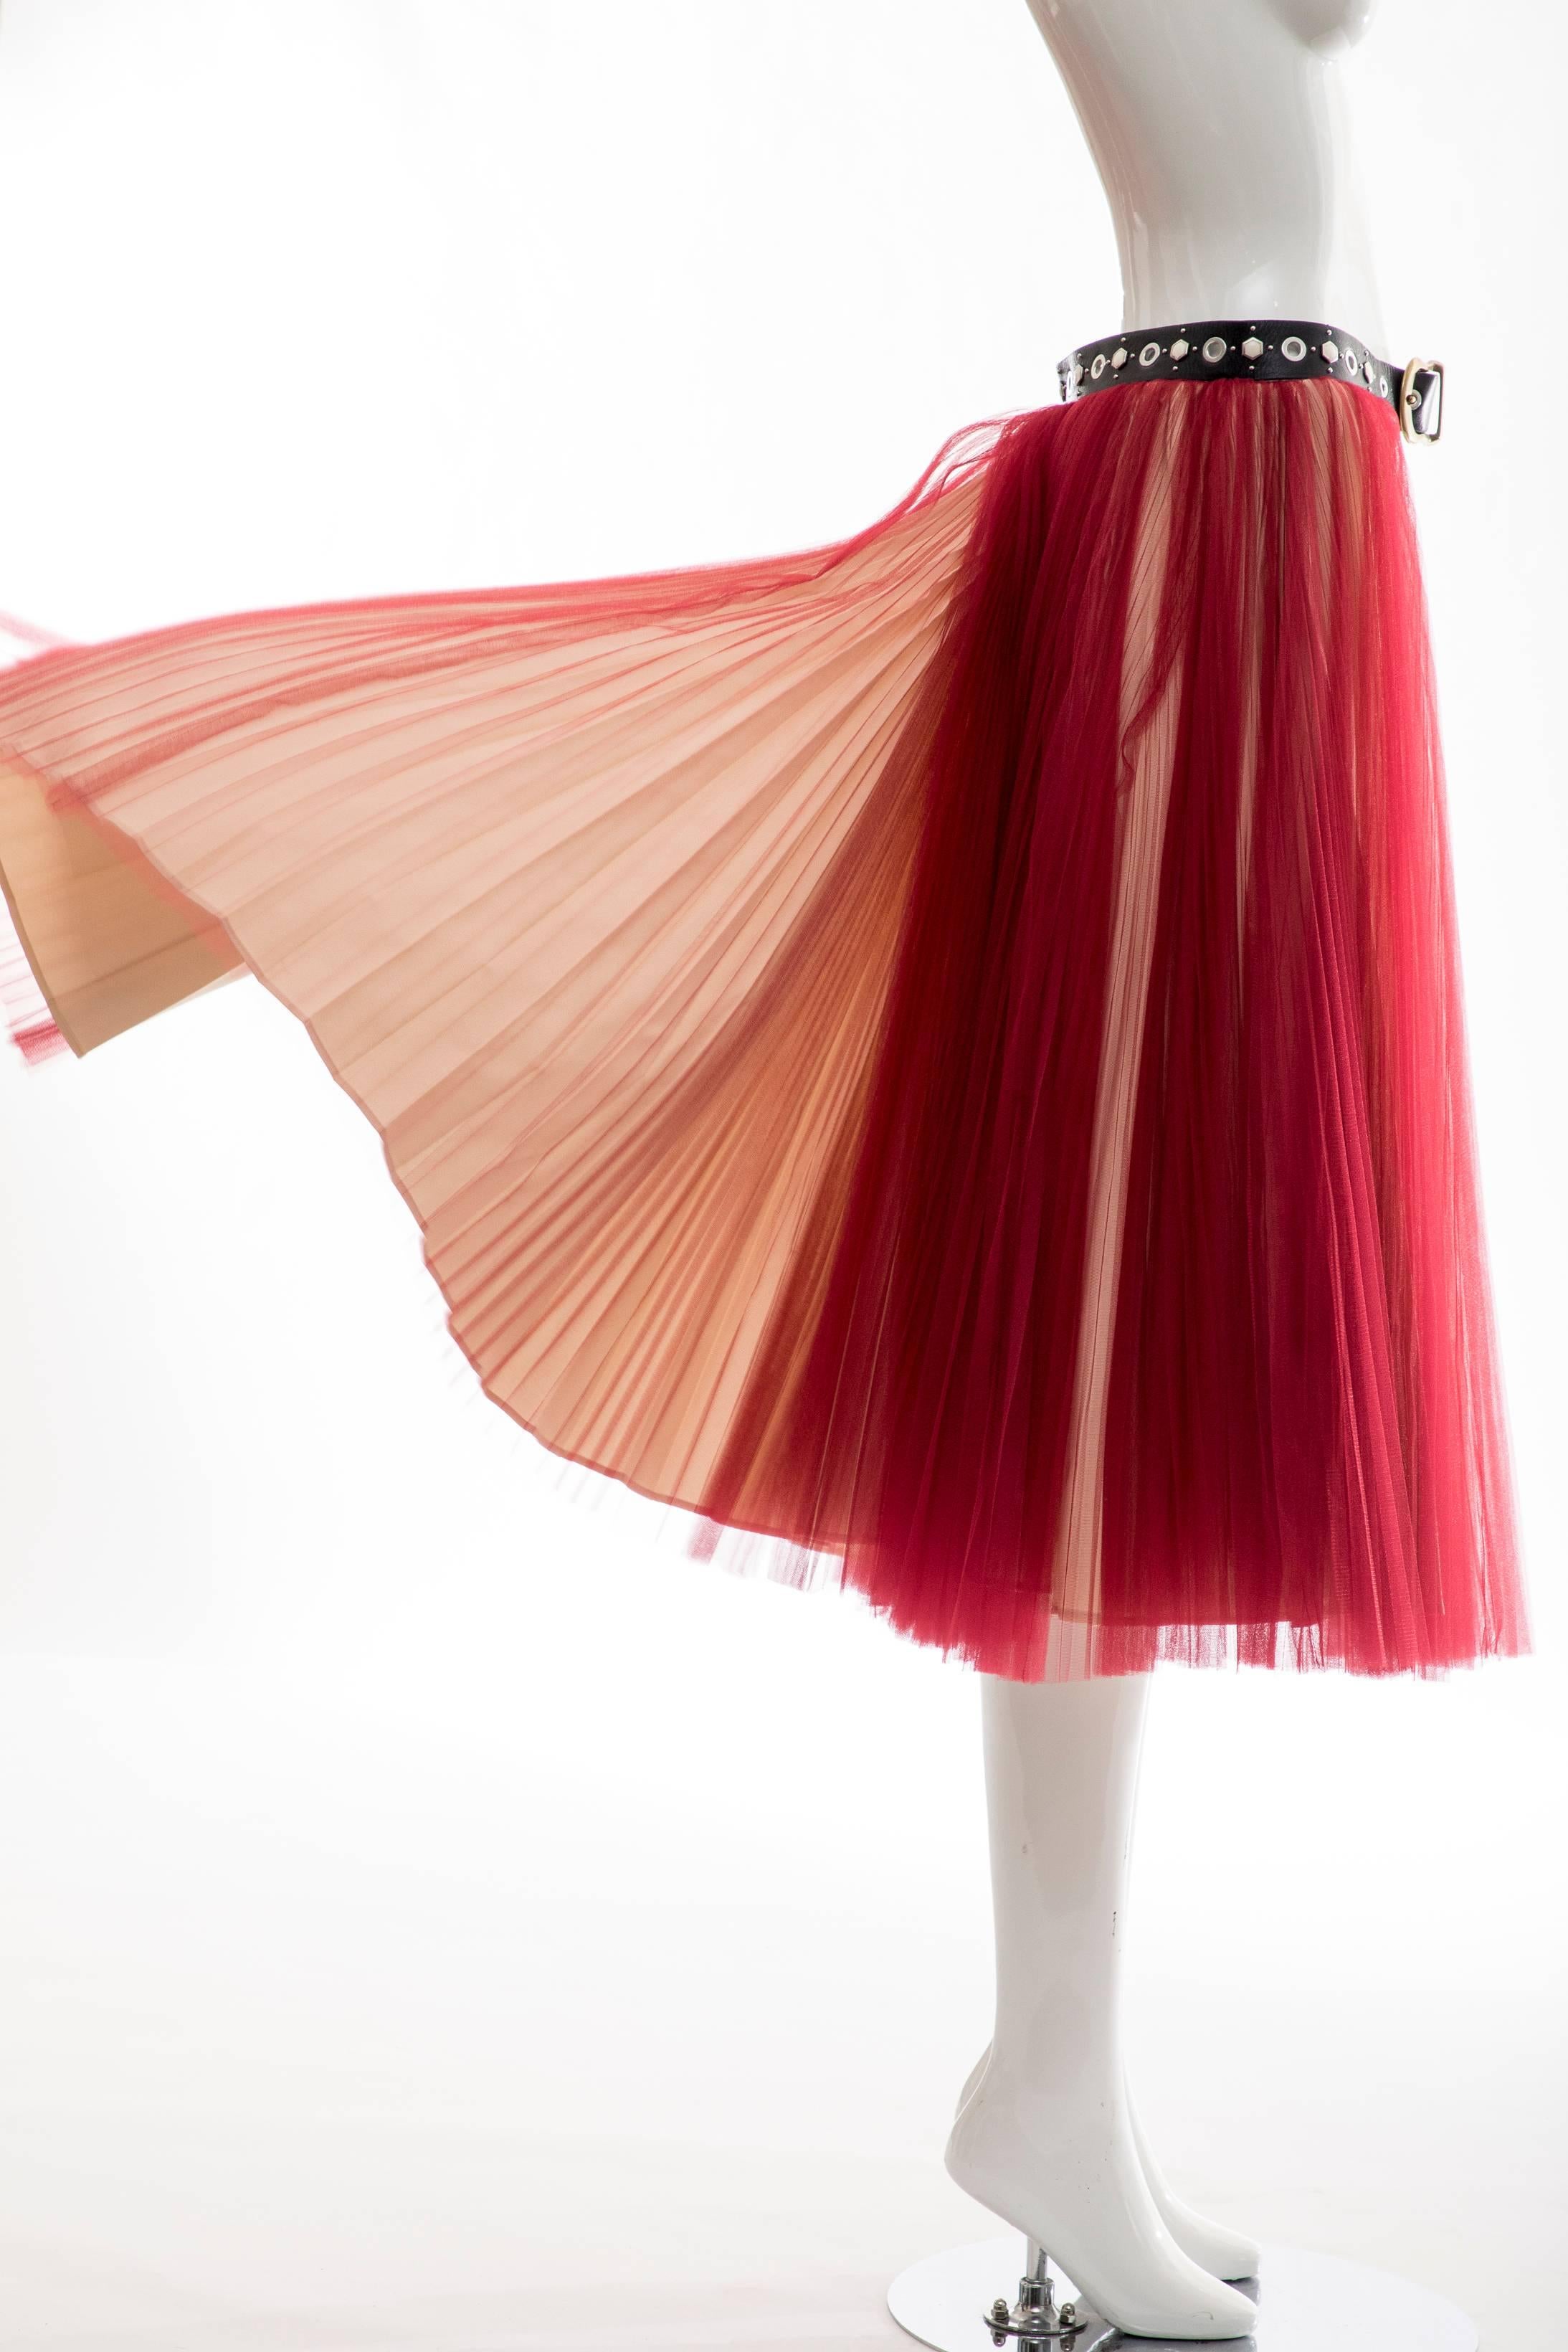 Undercover - Jun Takahashi Red Tulle Silver Pleated Skirt, Spring 2016 7